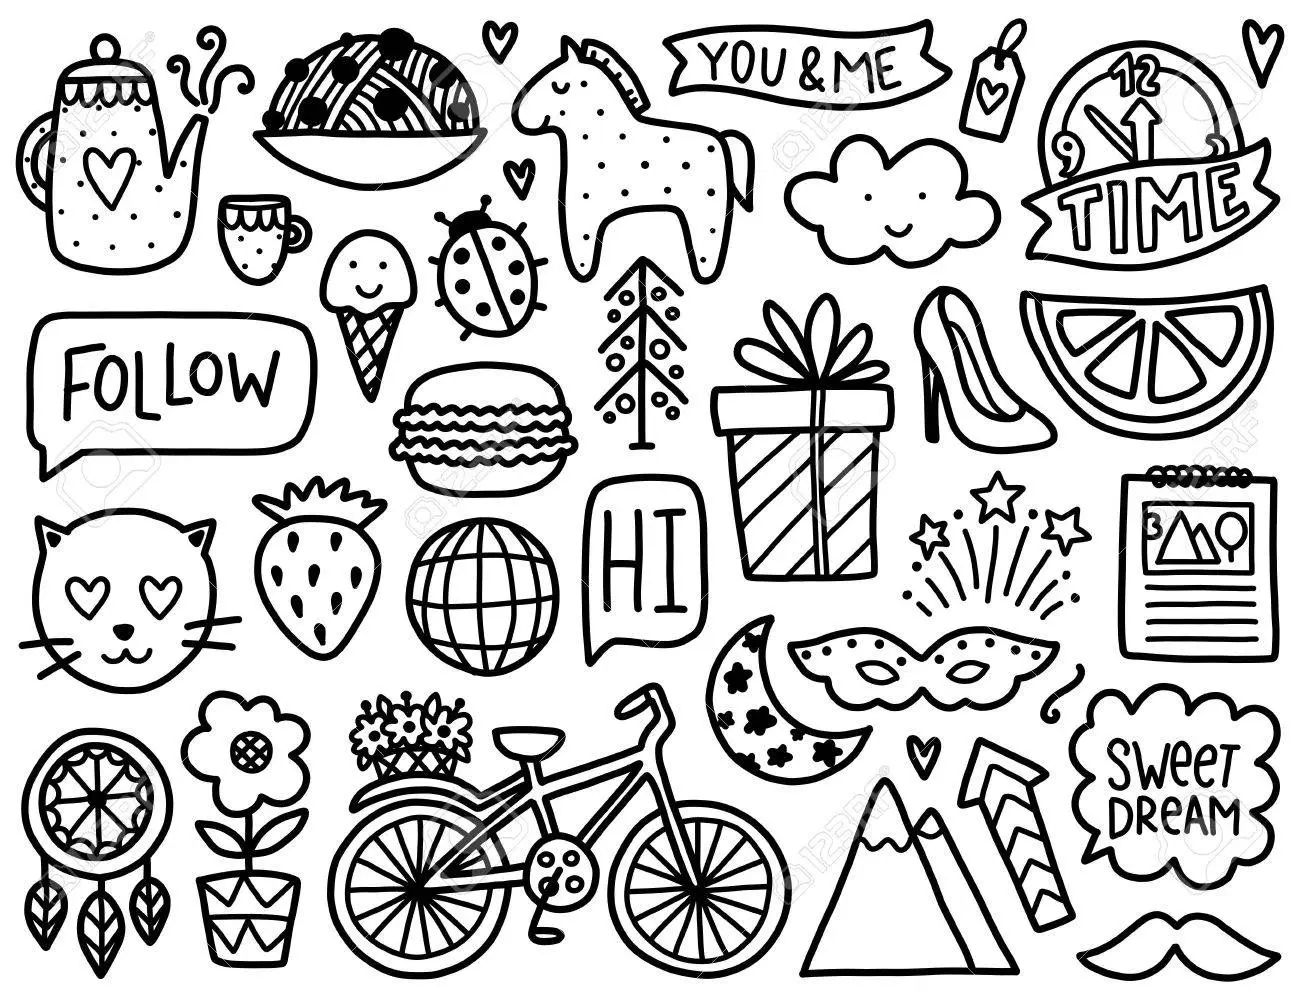 Discover the Joy of Coloring with Cute Doodle Coloring Pages